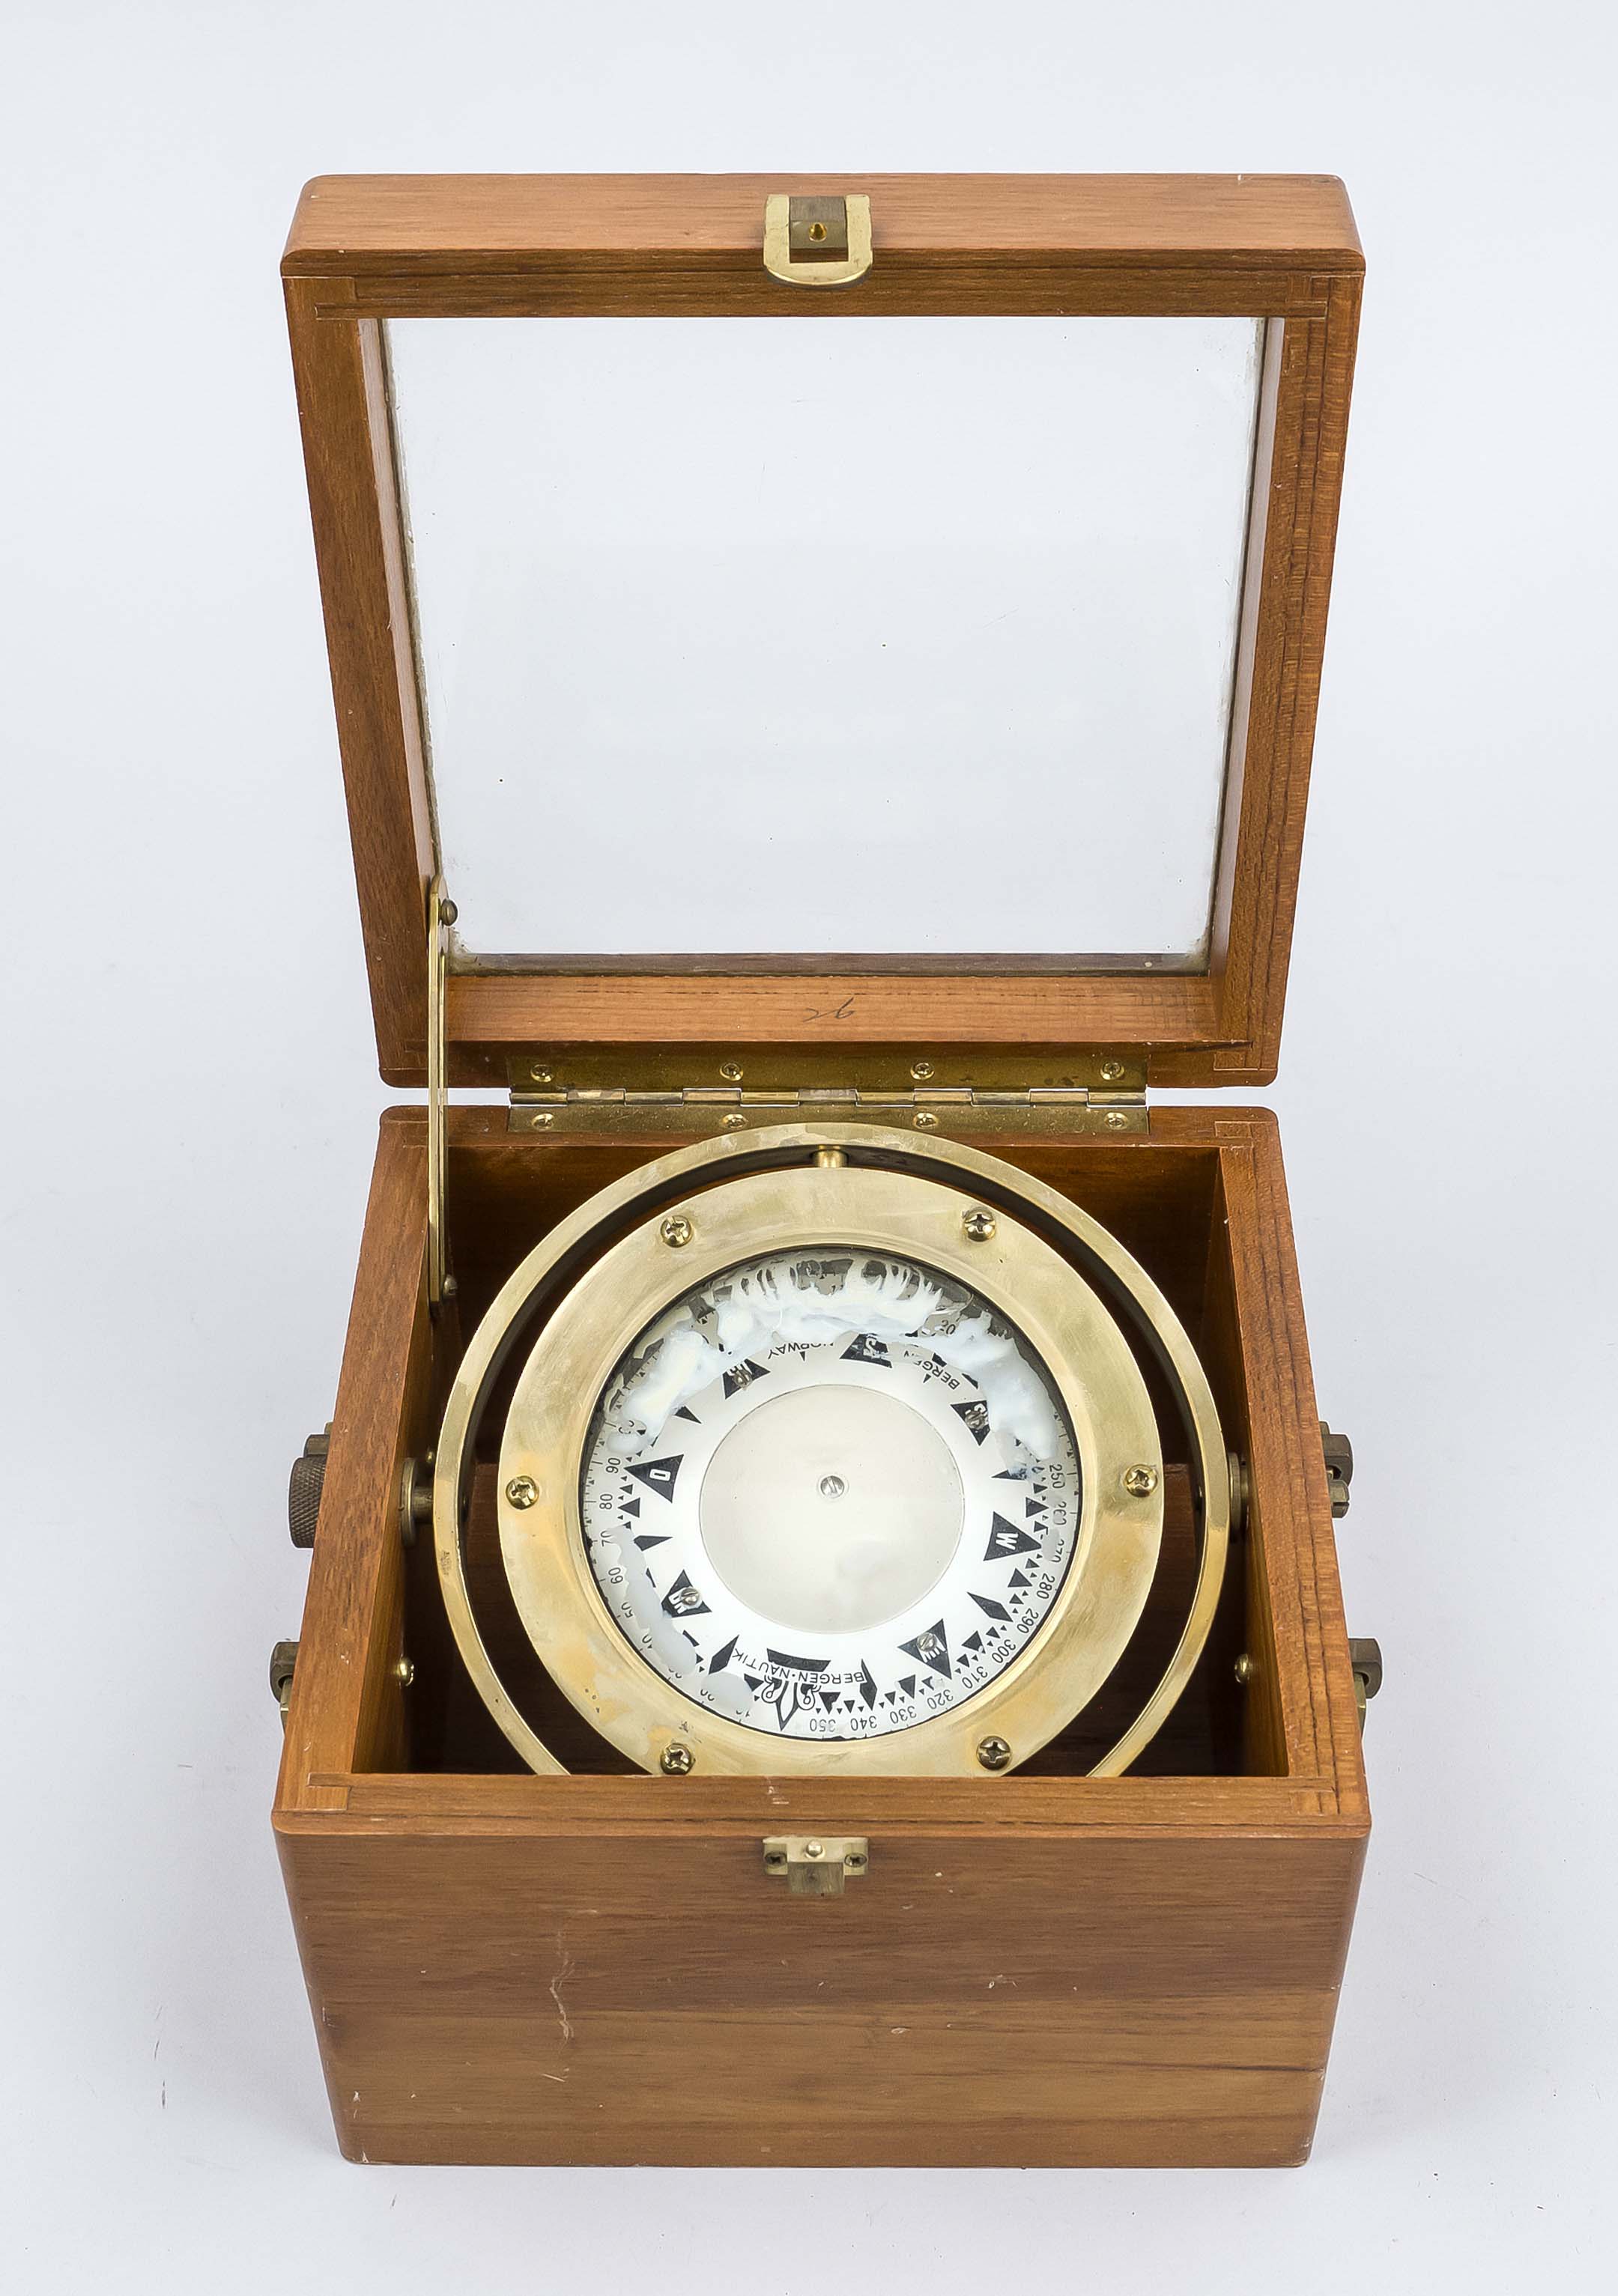 Maritime compass in wooden box with glass lid, 20th century, gimballed compass, liquid-damped,